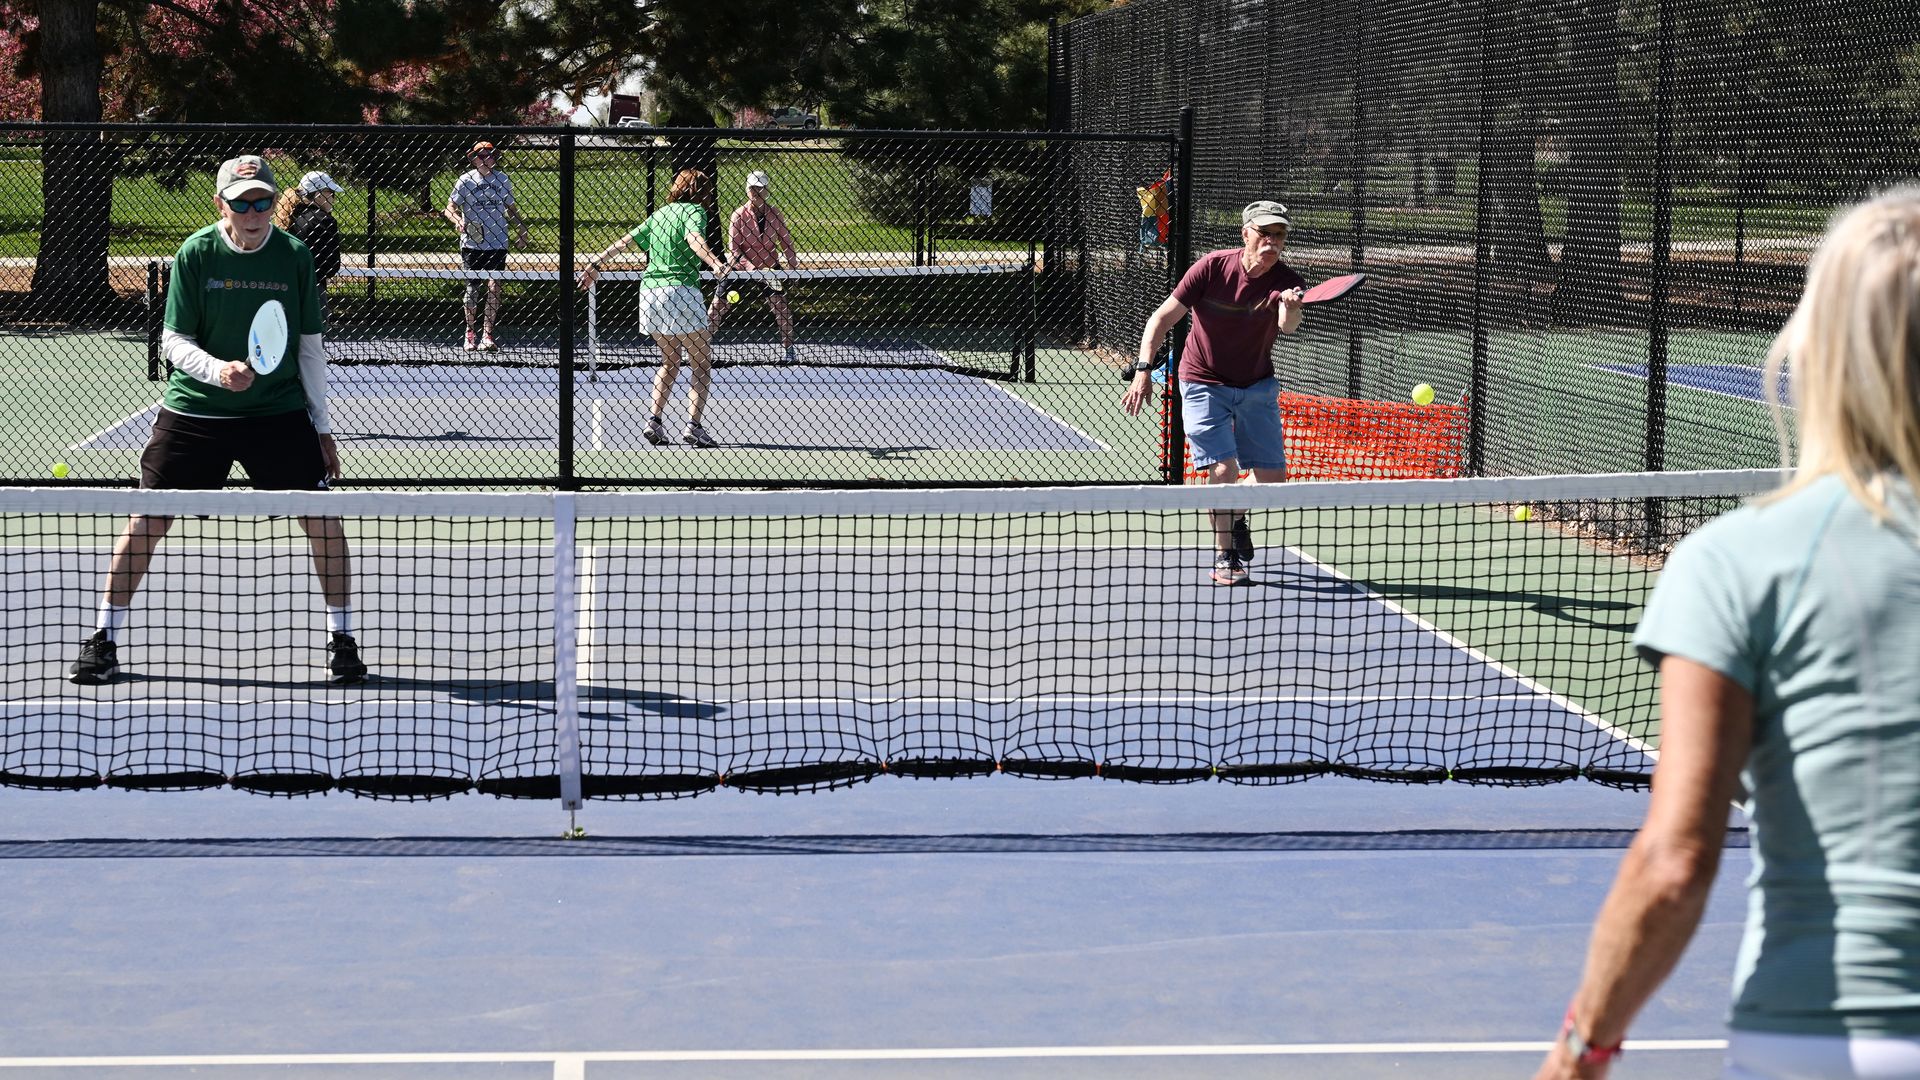 Photo shows players on a pickleball court